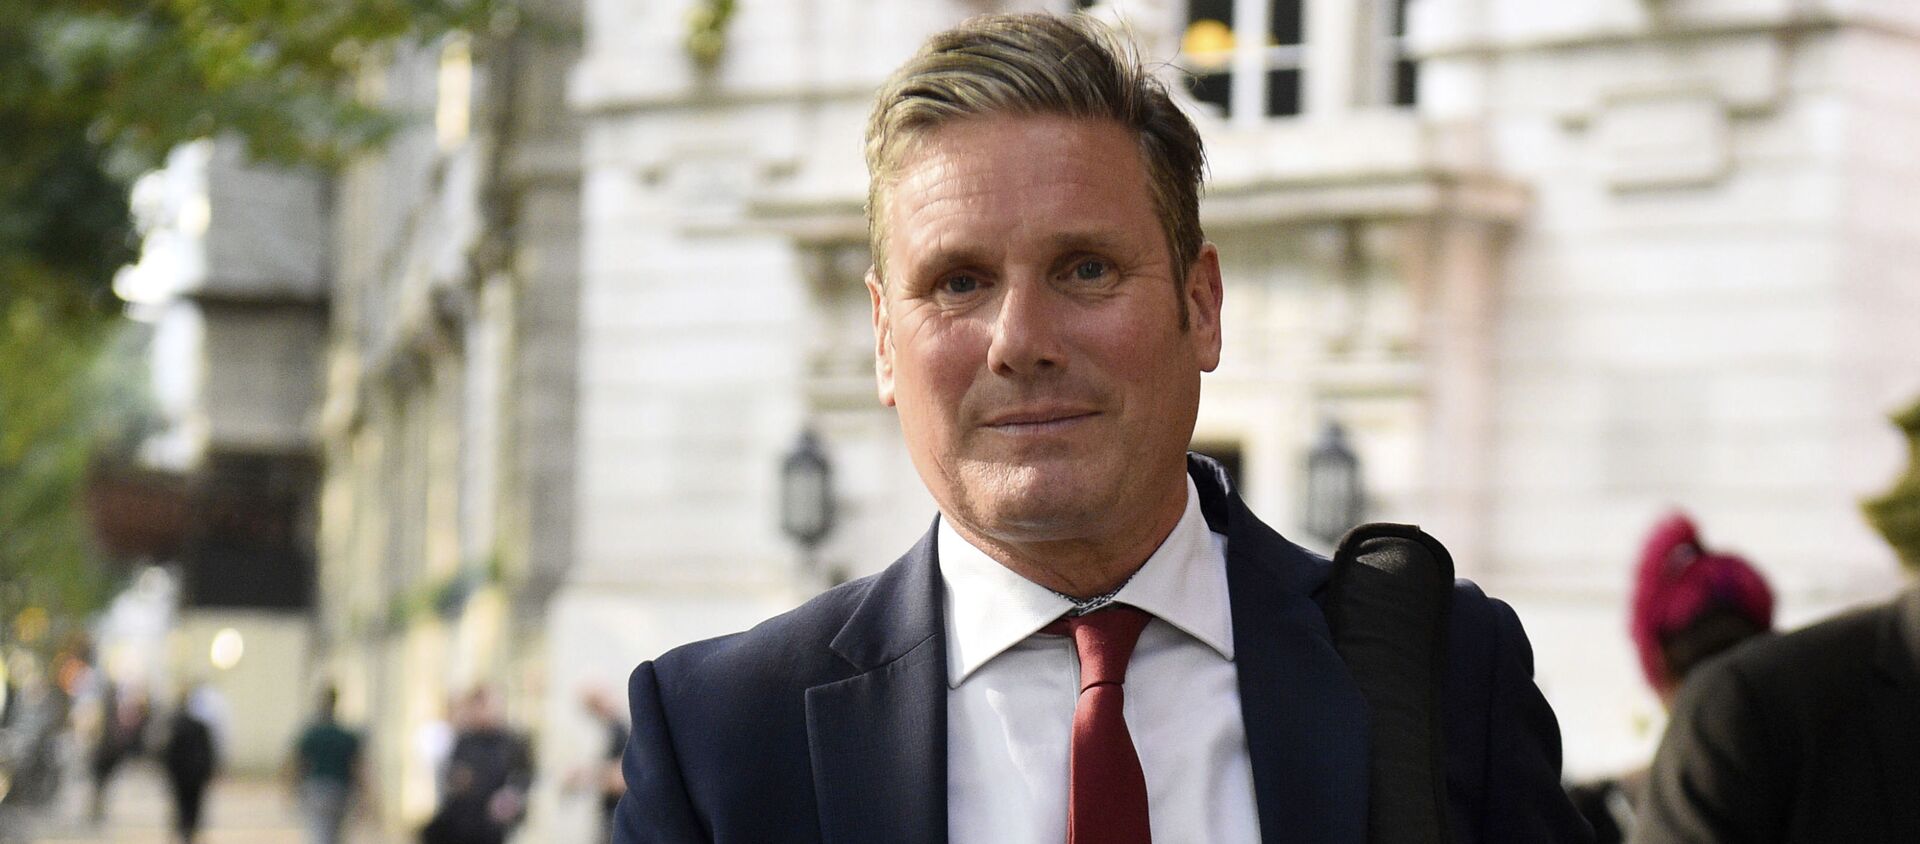 Keir Starmer, Britain's main opposition Labour Party Shadow Secretary of State for Exiting the European Union, in central London, Tuesday Aug. 27, 2019 - Sputnik International, 1920, 19.04.2021